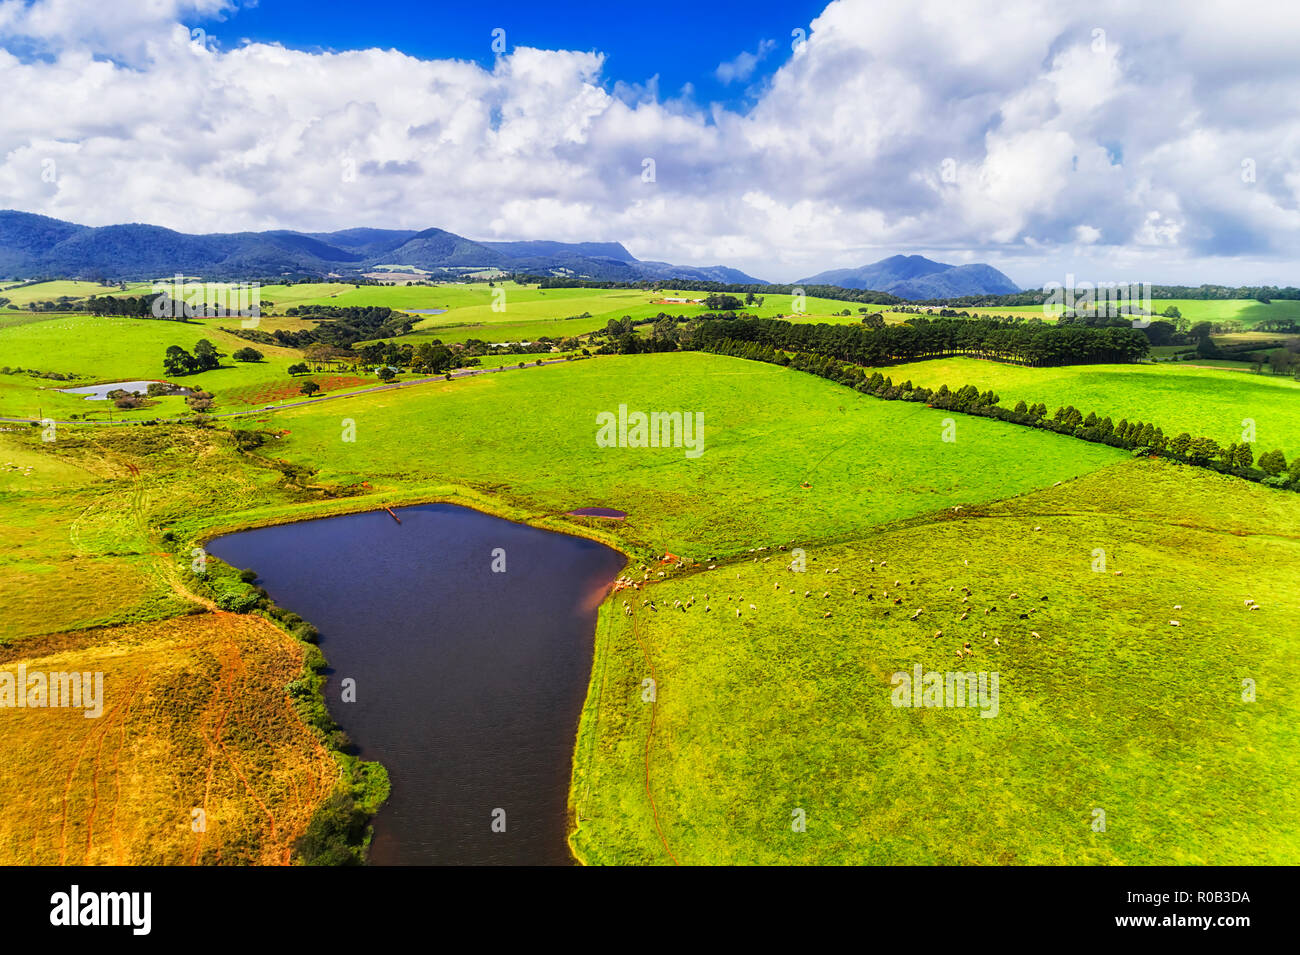 Grazing country of rural regional Australia with emerald cultivated cattle farm fields around water pit under blue sky in bright sun light. Stock Photo